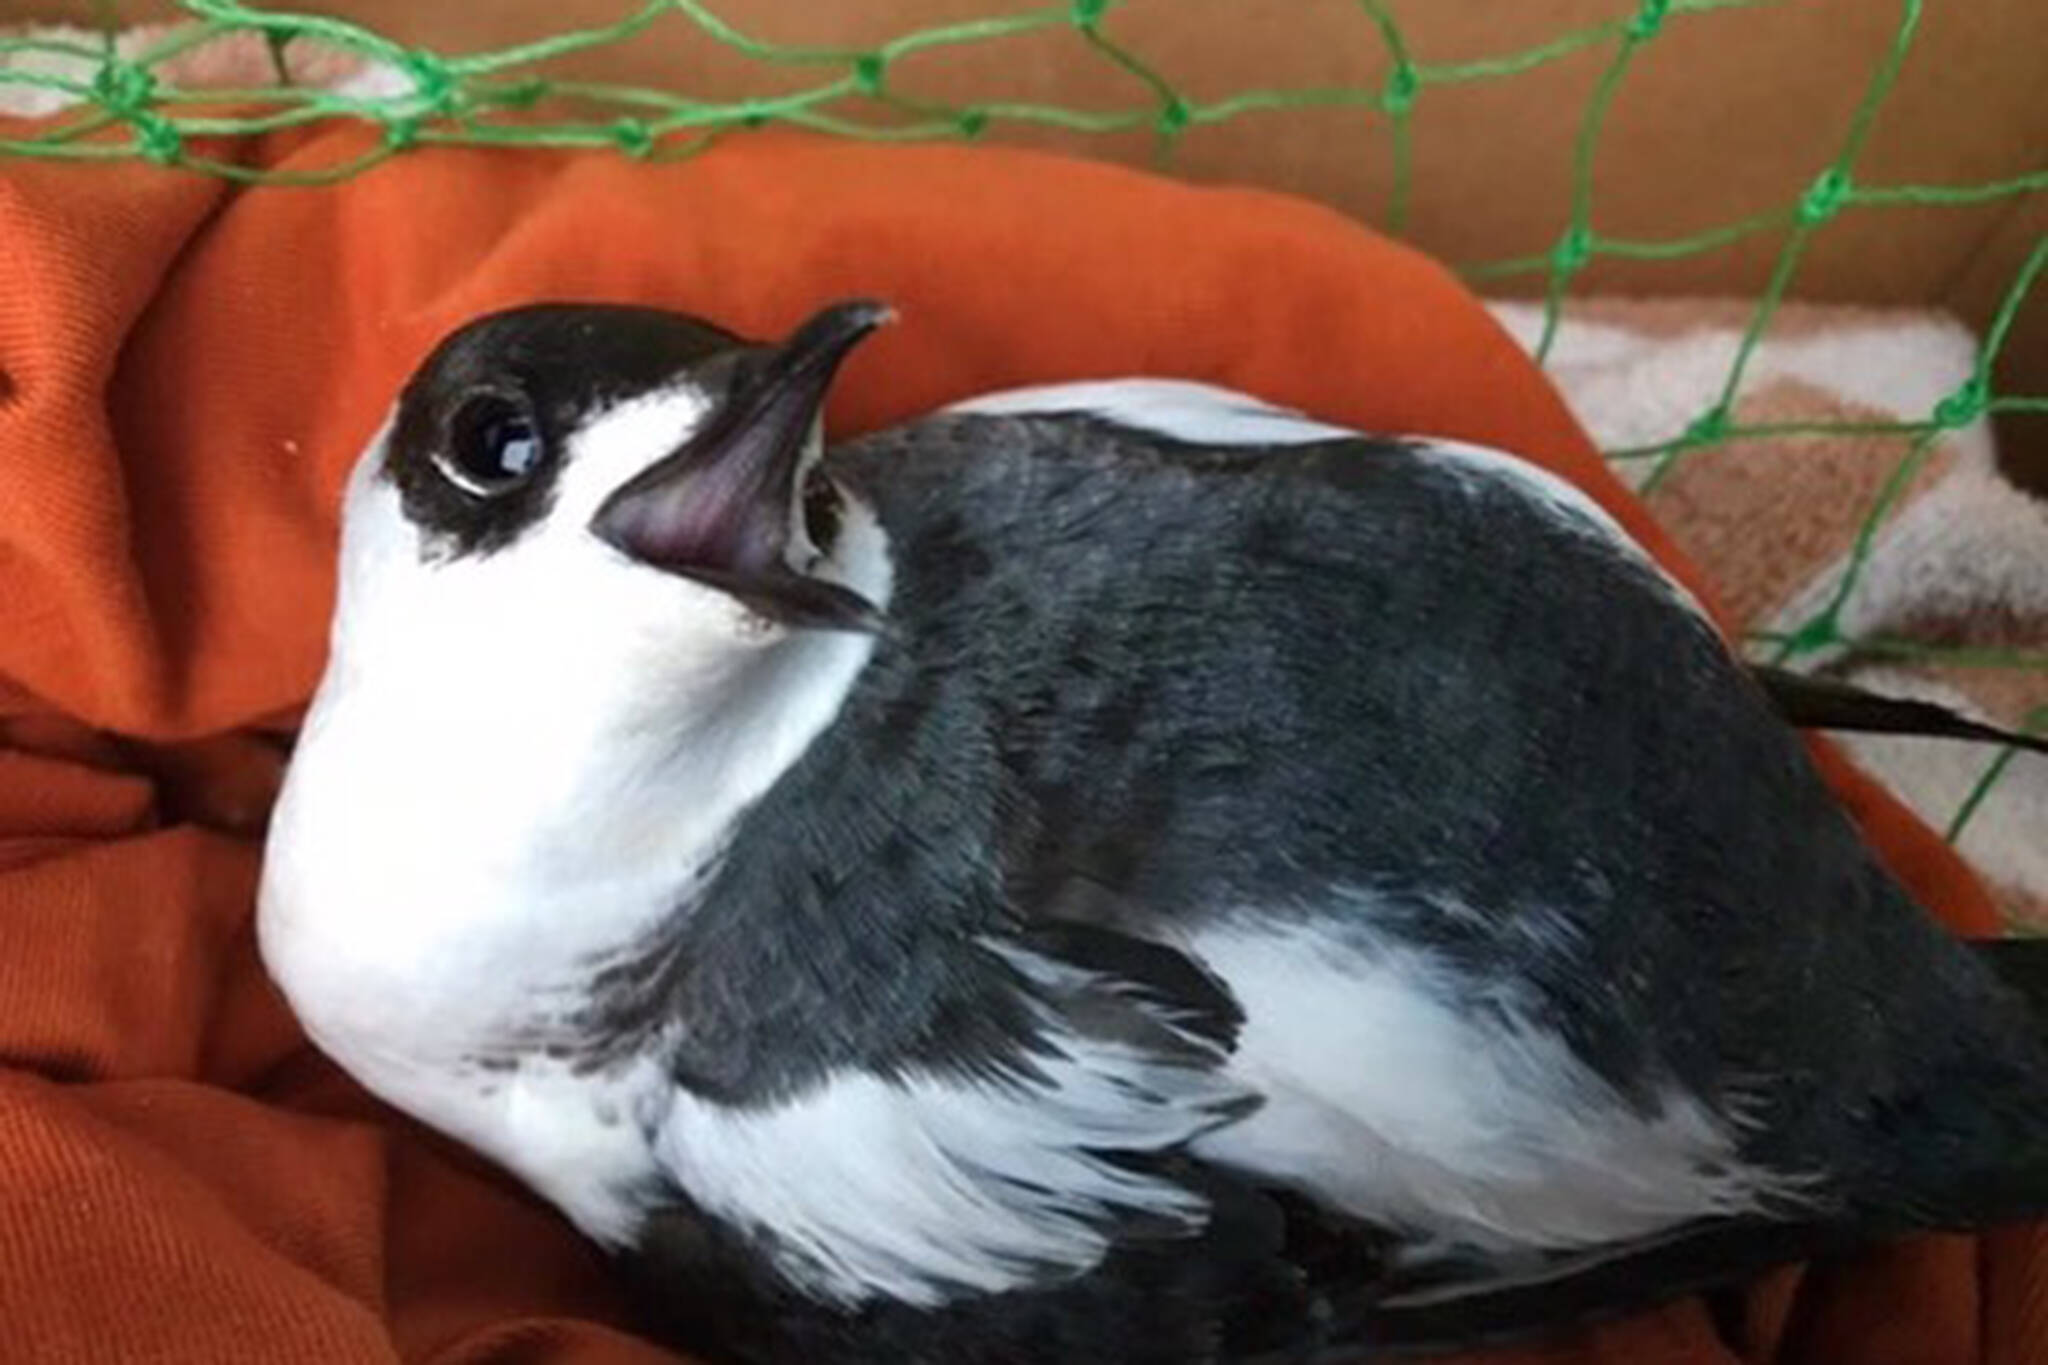 This marbled murrelet seabird was found in the waters of Auke Bay in January looking “stunned.” Volunteers took the bird to the Juneau Raptor Center where it was treated for likely head trauma and released back into the wild. (Courtesy Photo / Juneau Raptor Center)